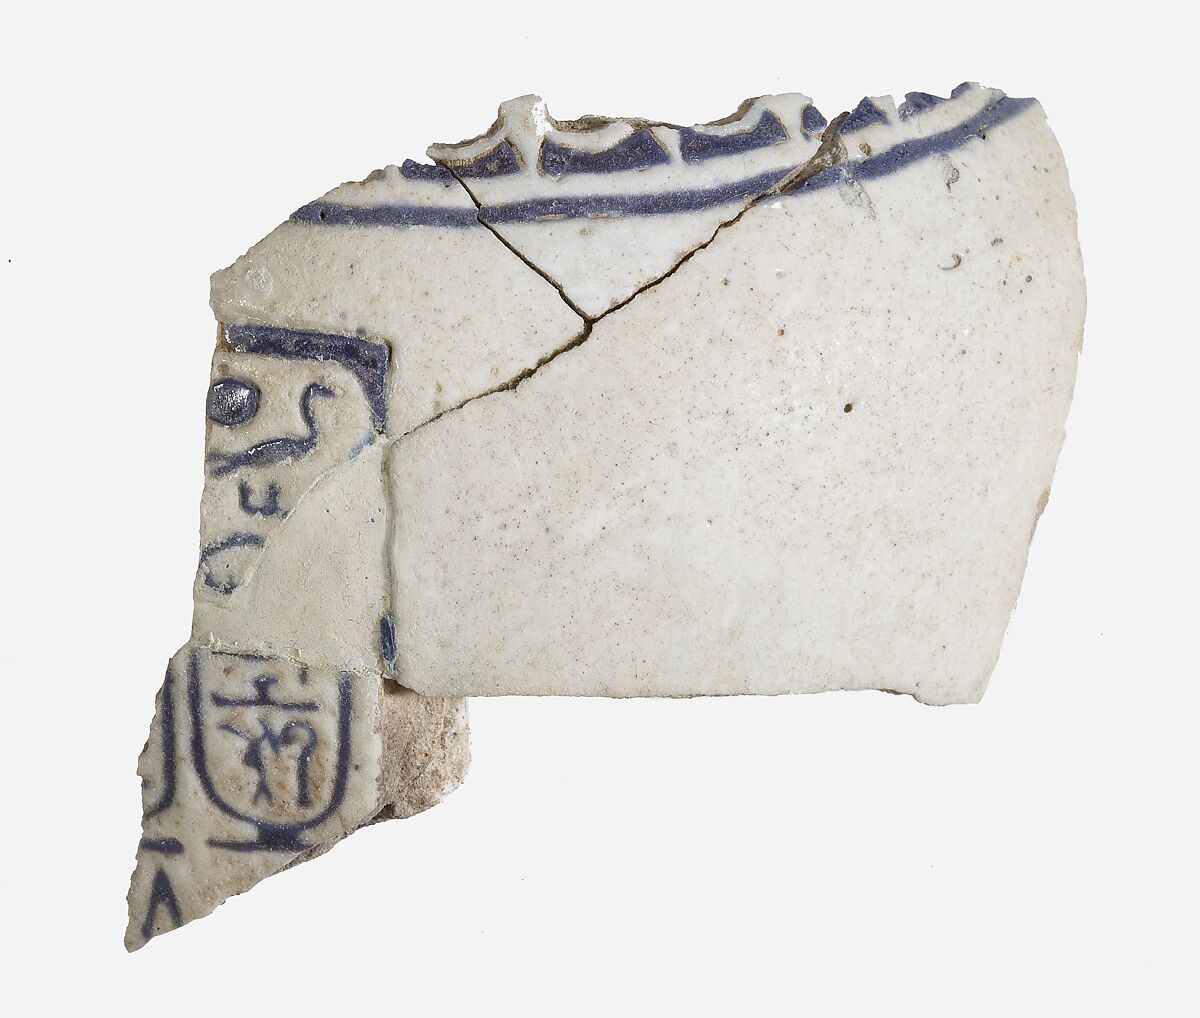 Fragments of Vase, Faience 